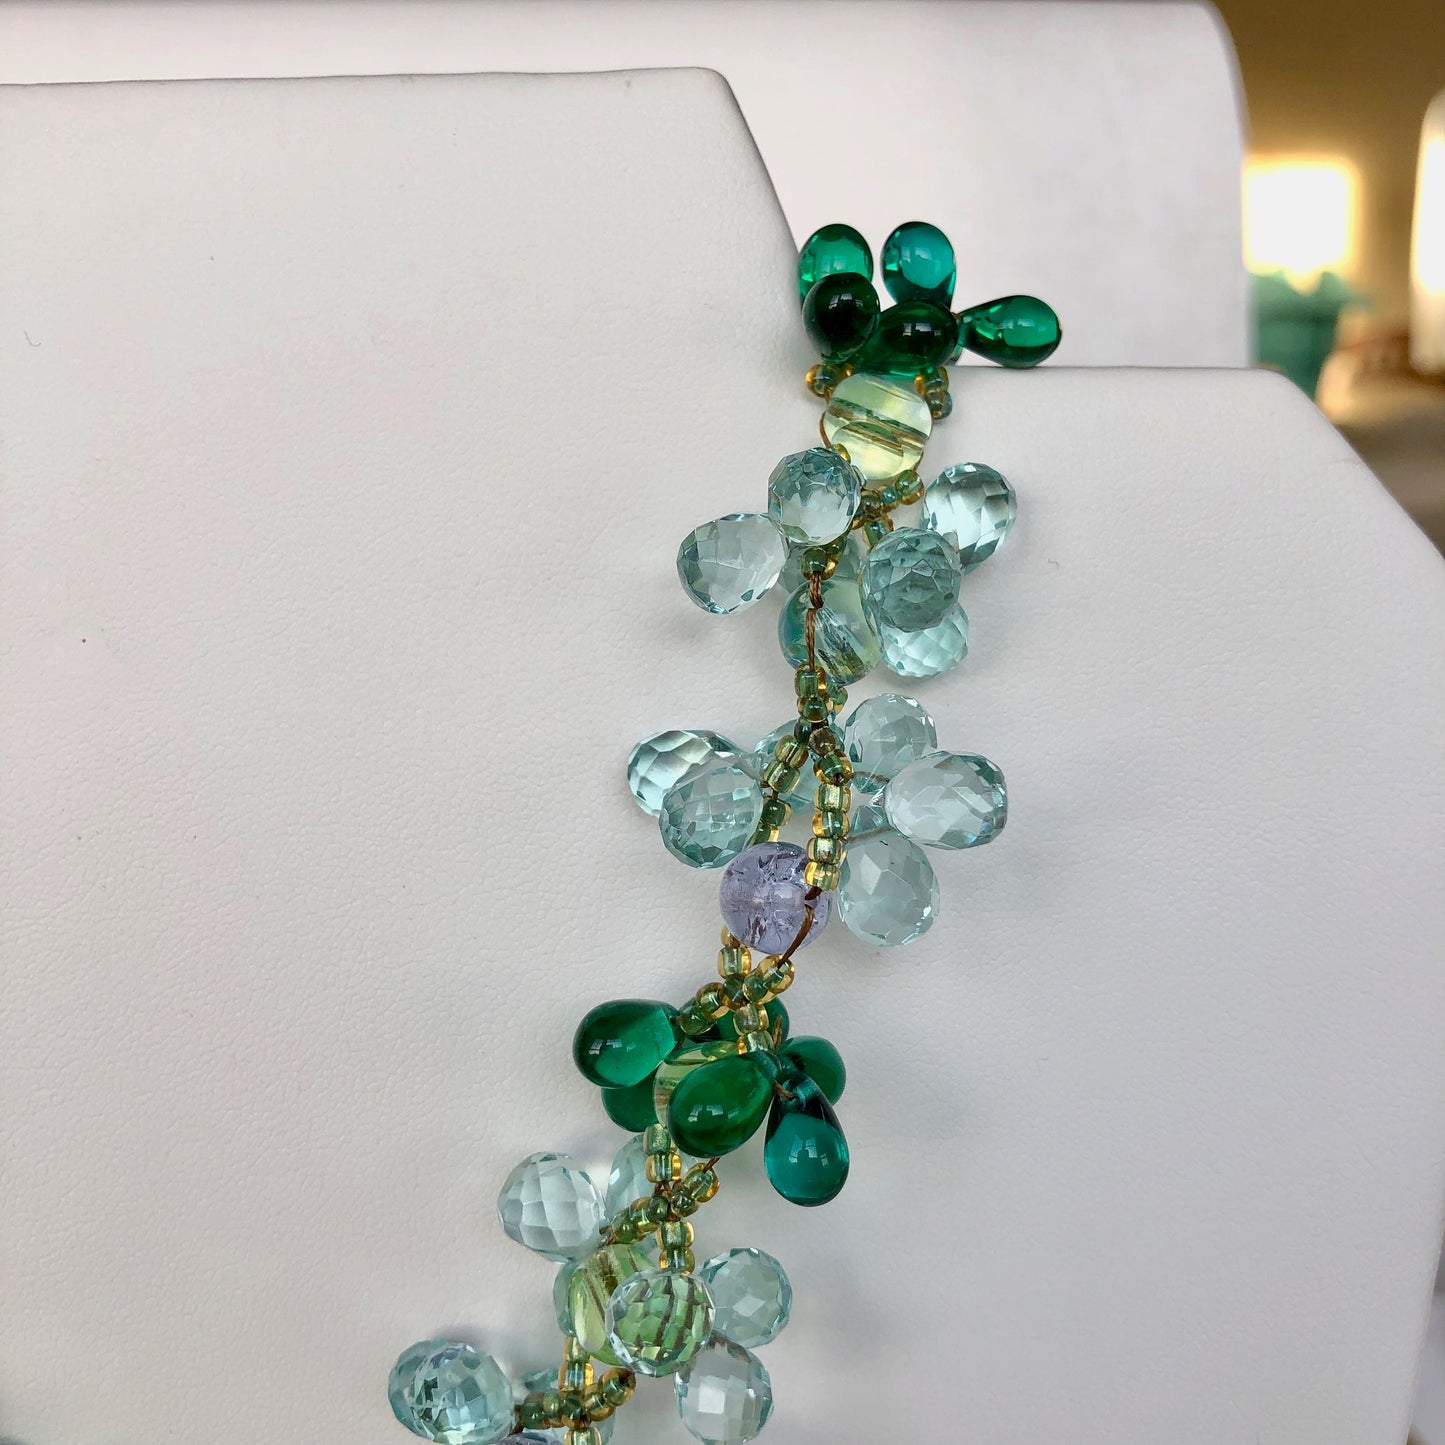 Stunning necklace hand beaded with aurora borealis tinted mint green and light blue glass beads. A garden for your neck.